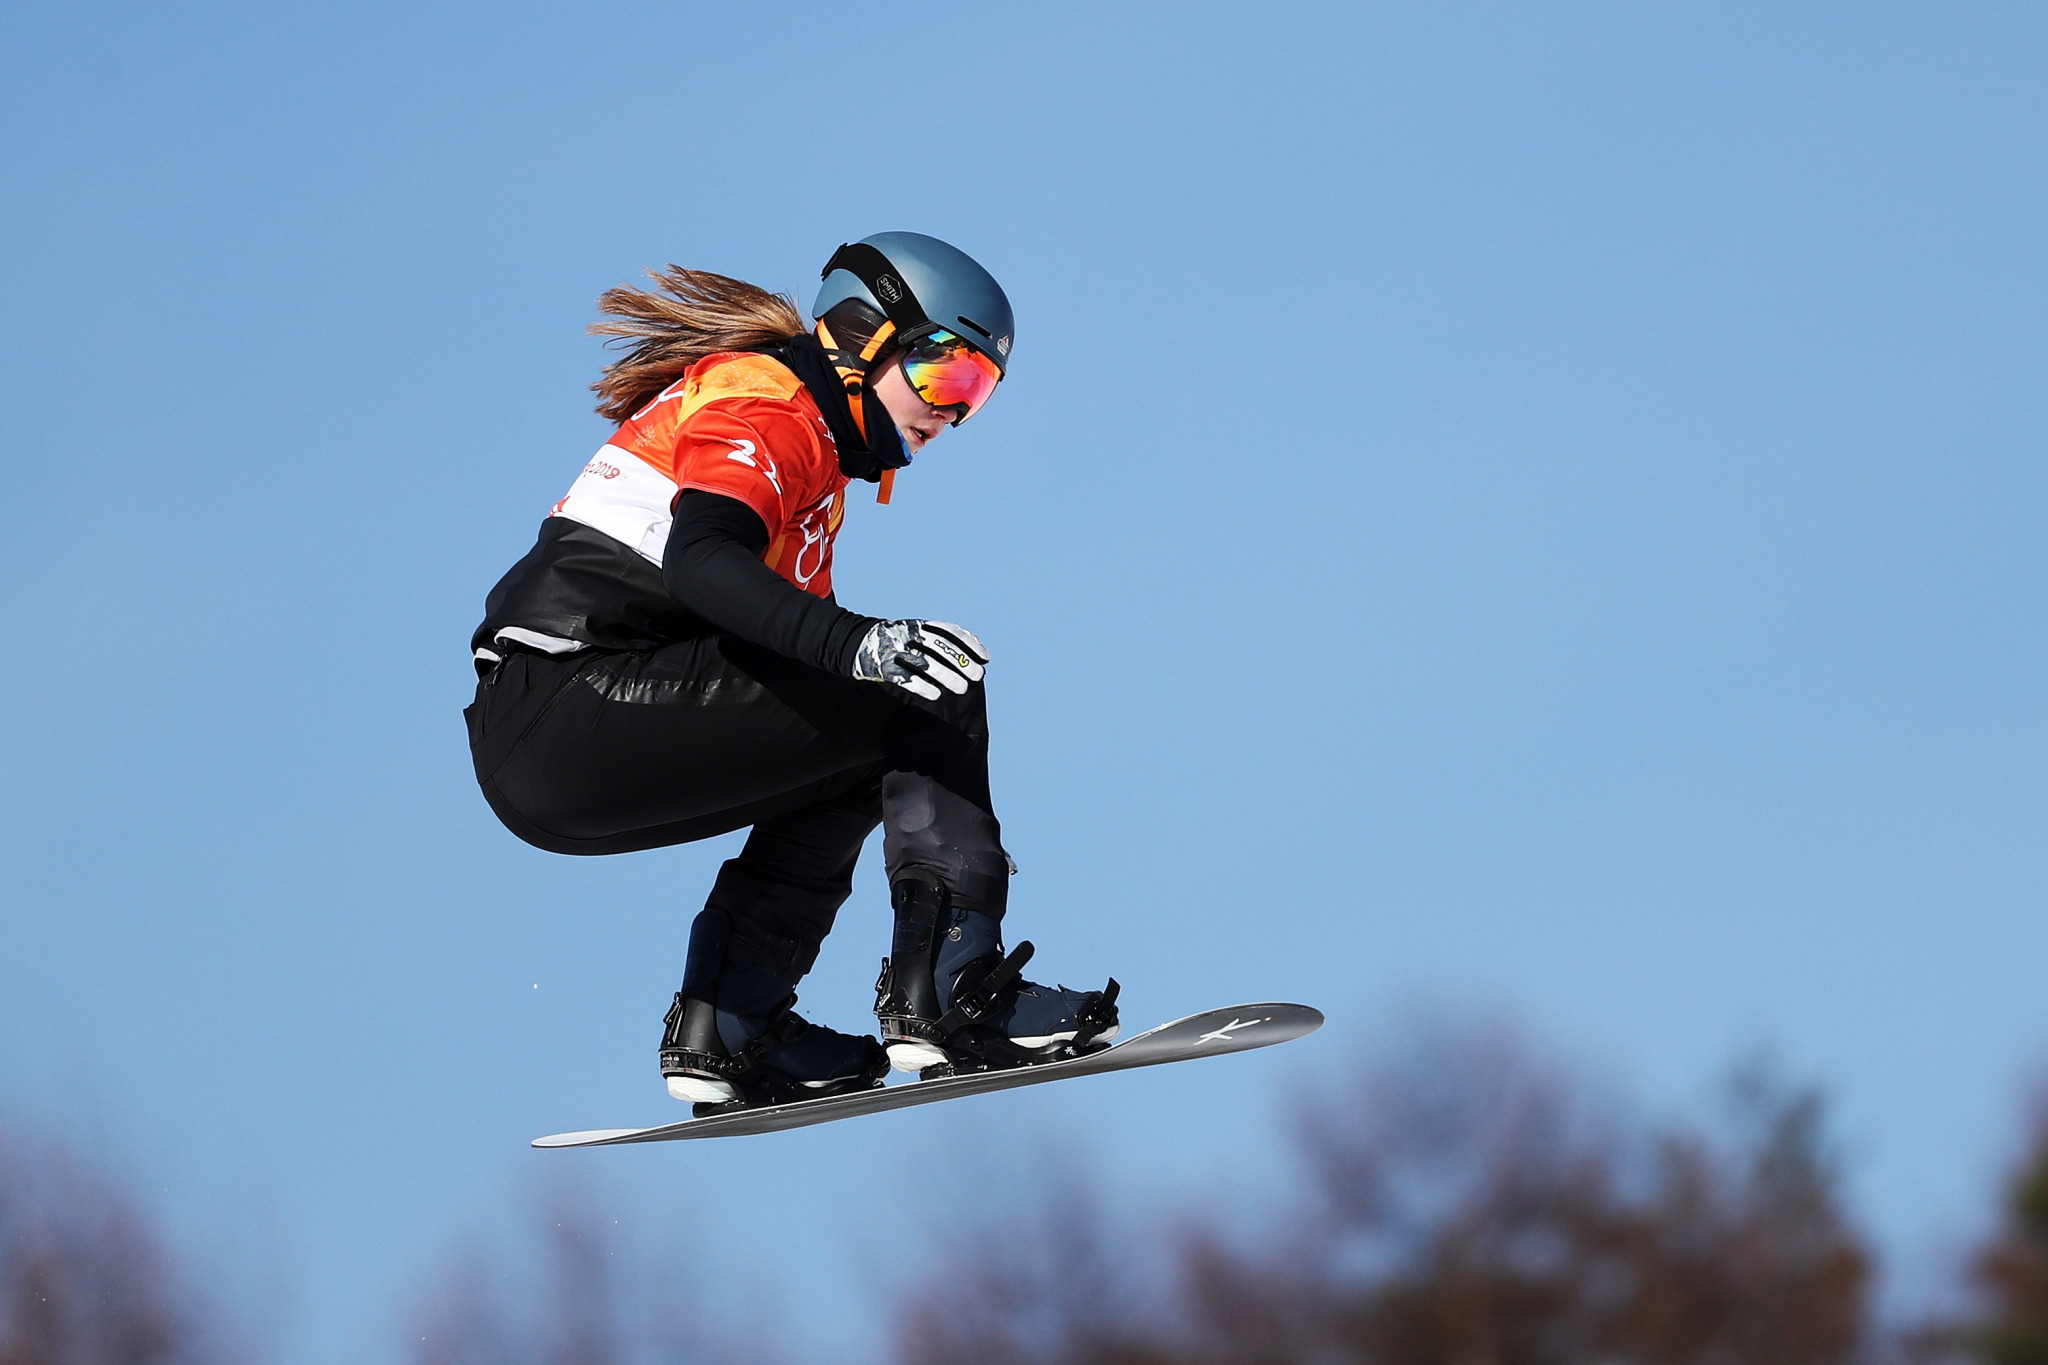 Germany's Jana Fischer led the women's snowboard cross qualifying at the International Ski Federation (FIS) Freestyle Ski World Junior Championships in Reiteralm ©Getty Images